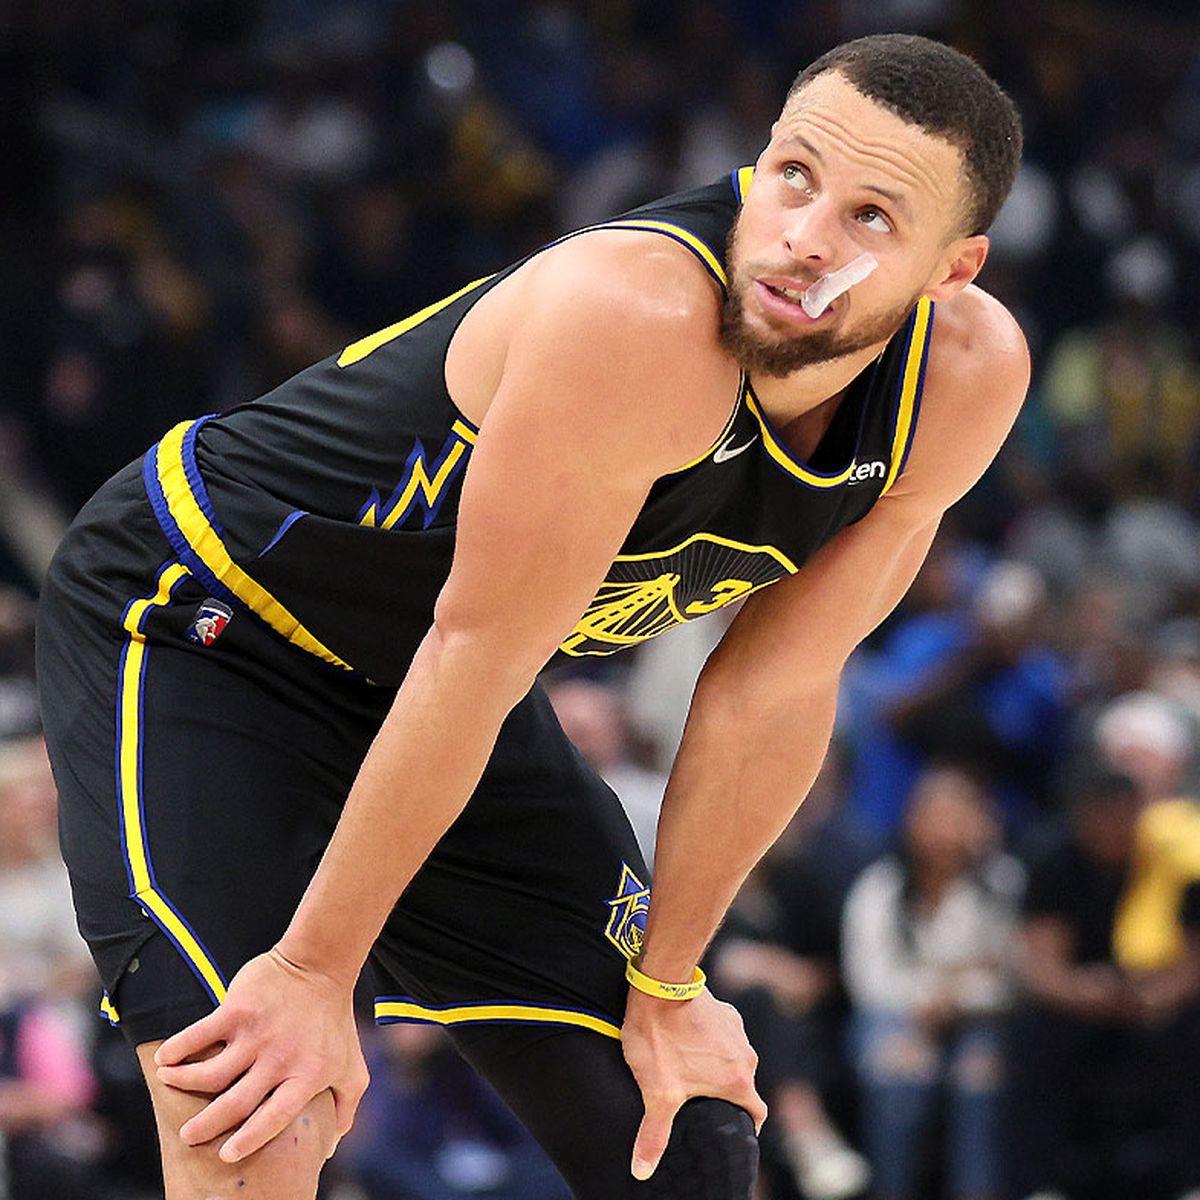 Steph Curry put on the show of a lifetime at NBA All Star 2022